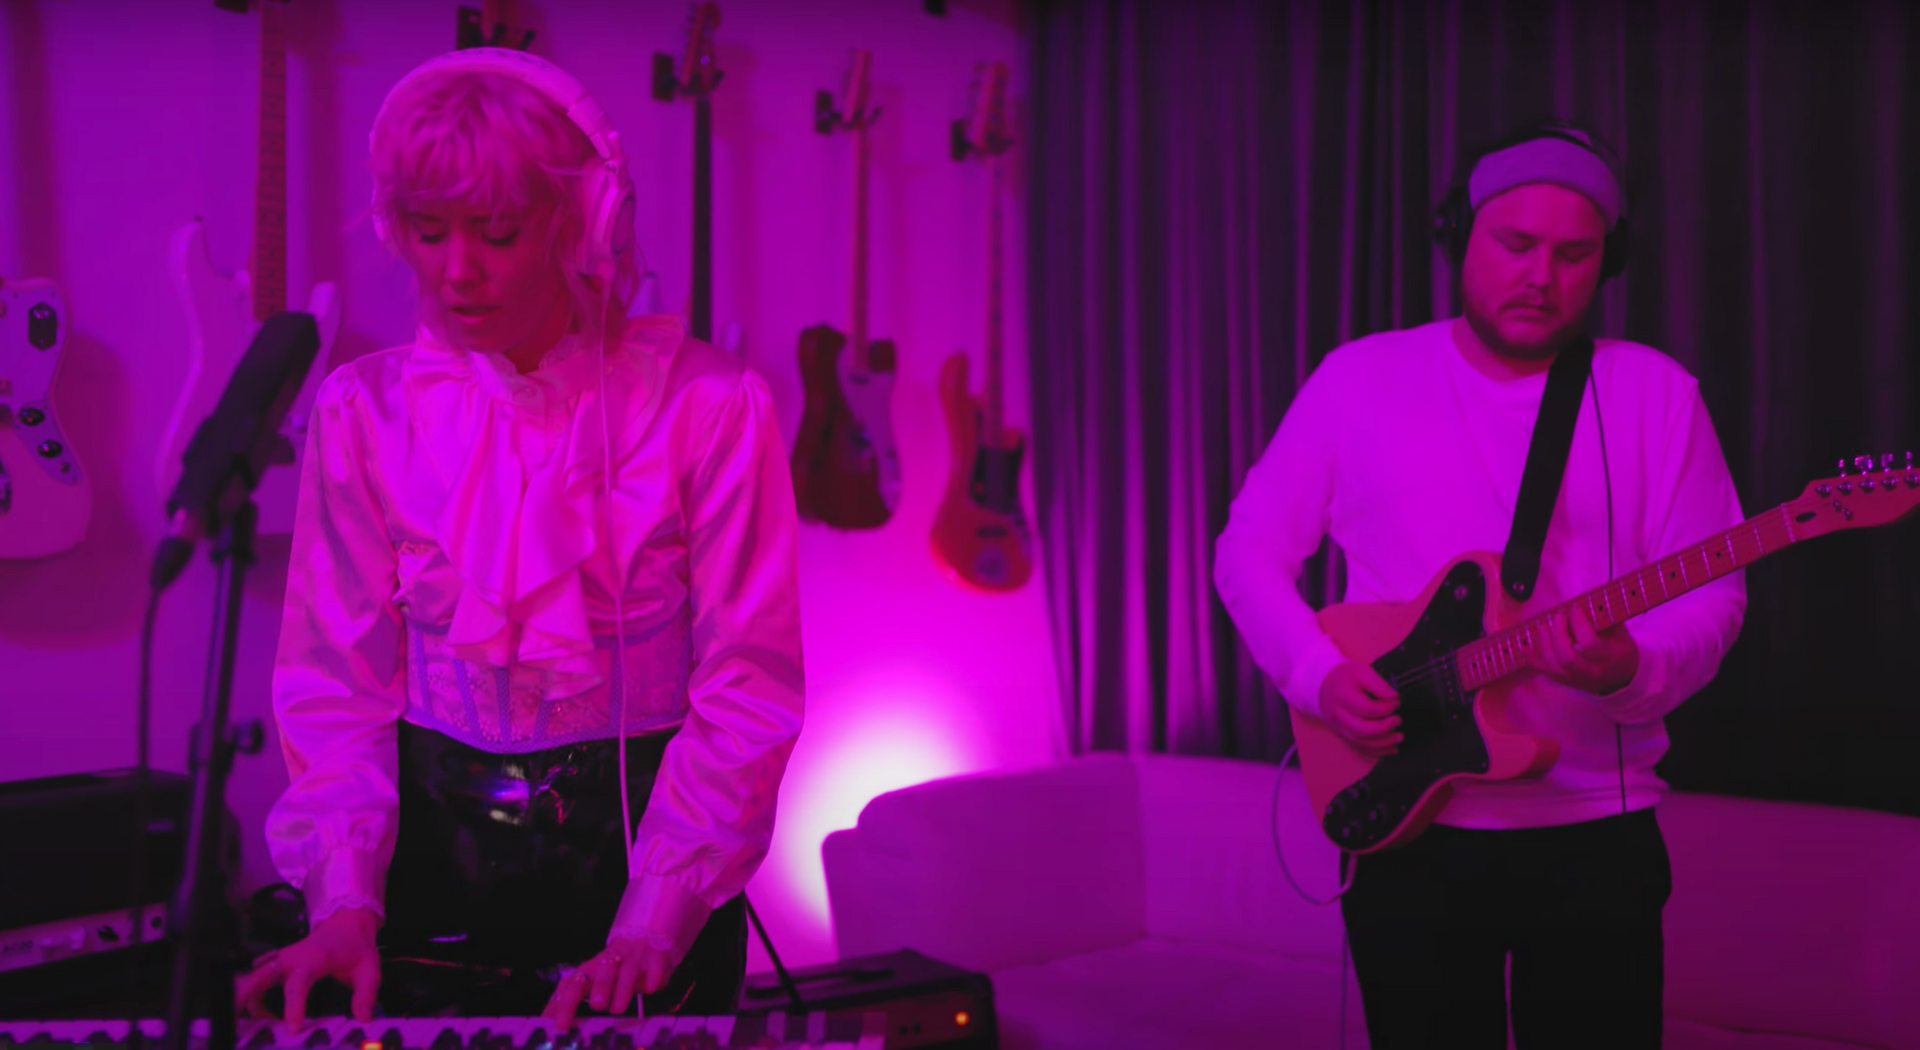 Load video: New Constellations Band Does It Feel Like This Live Performance Video